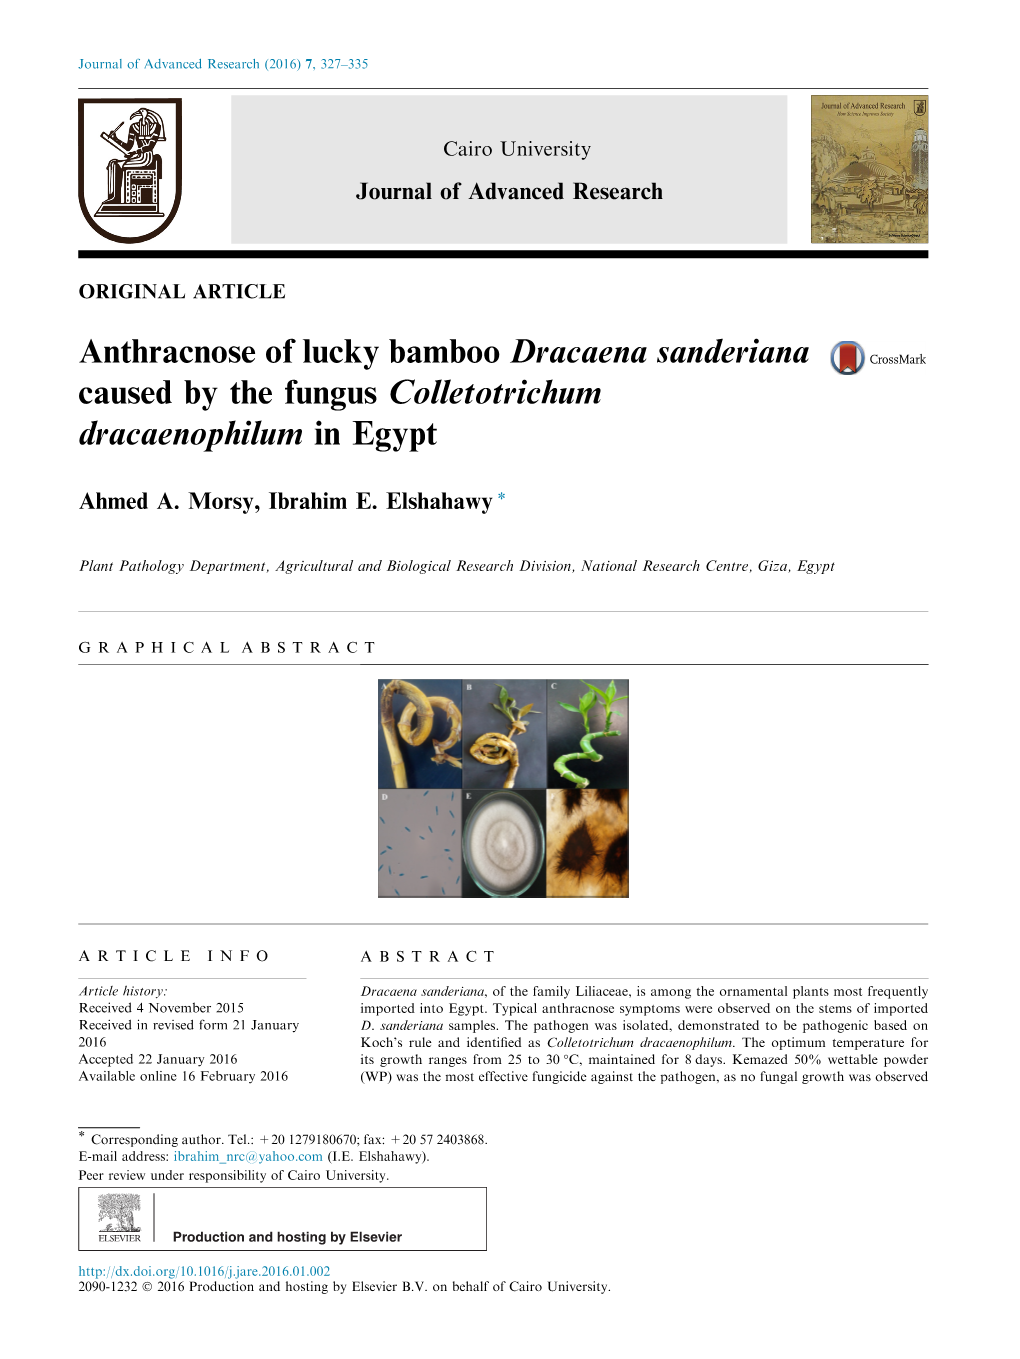 Anthracnose of Lucky Bamboo Dracaena Sanderiana Caused by the Fungus Colletotrichum Dracaenophilum in Egypt